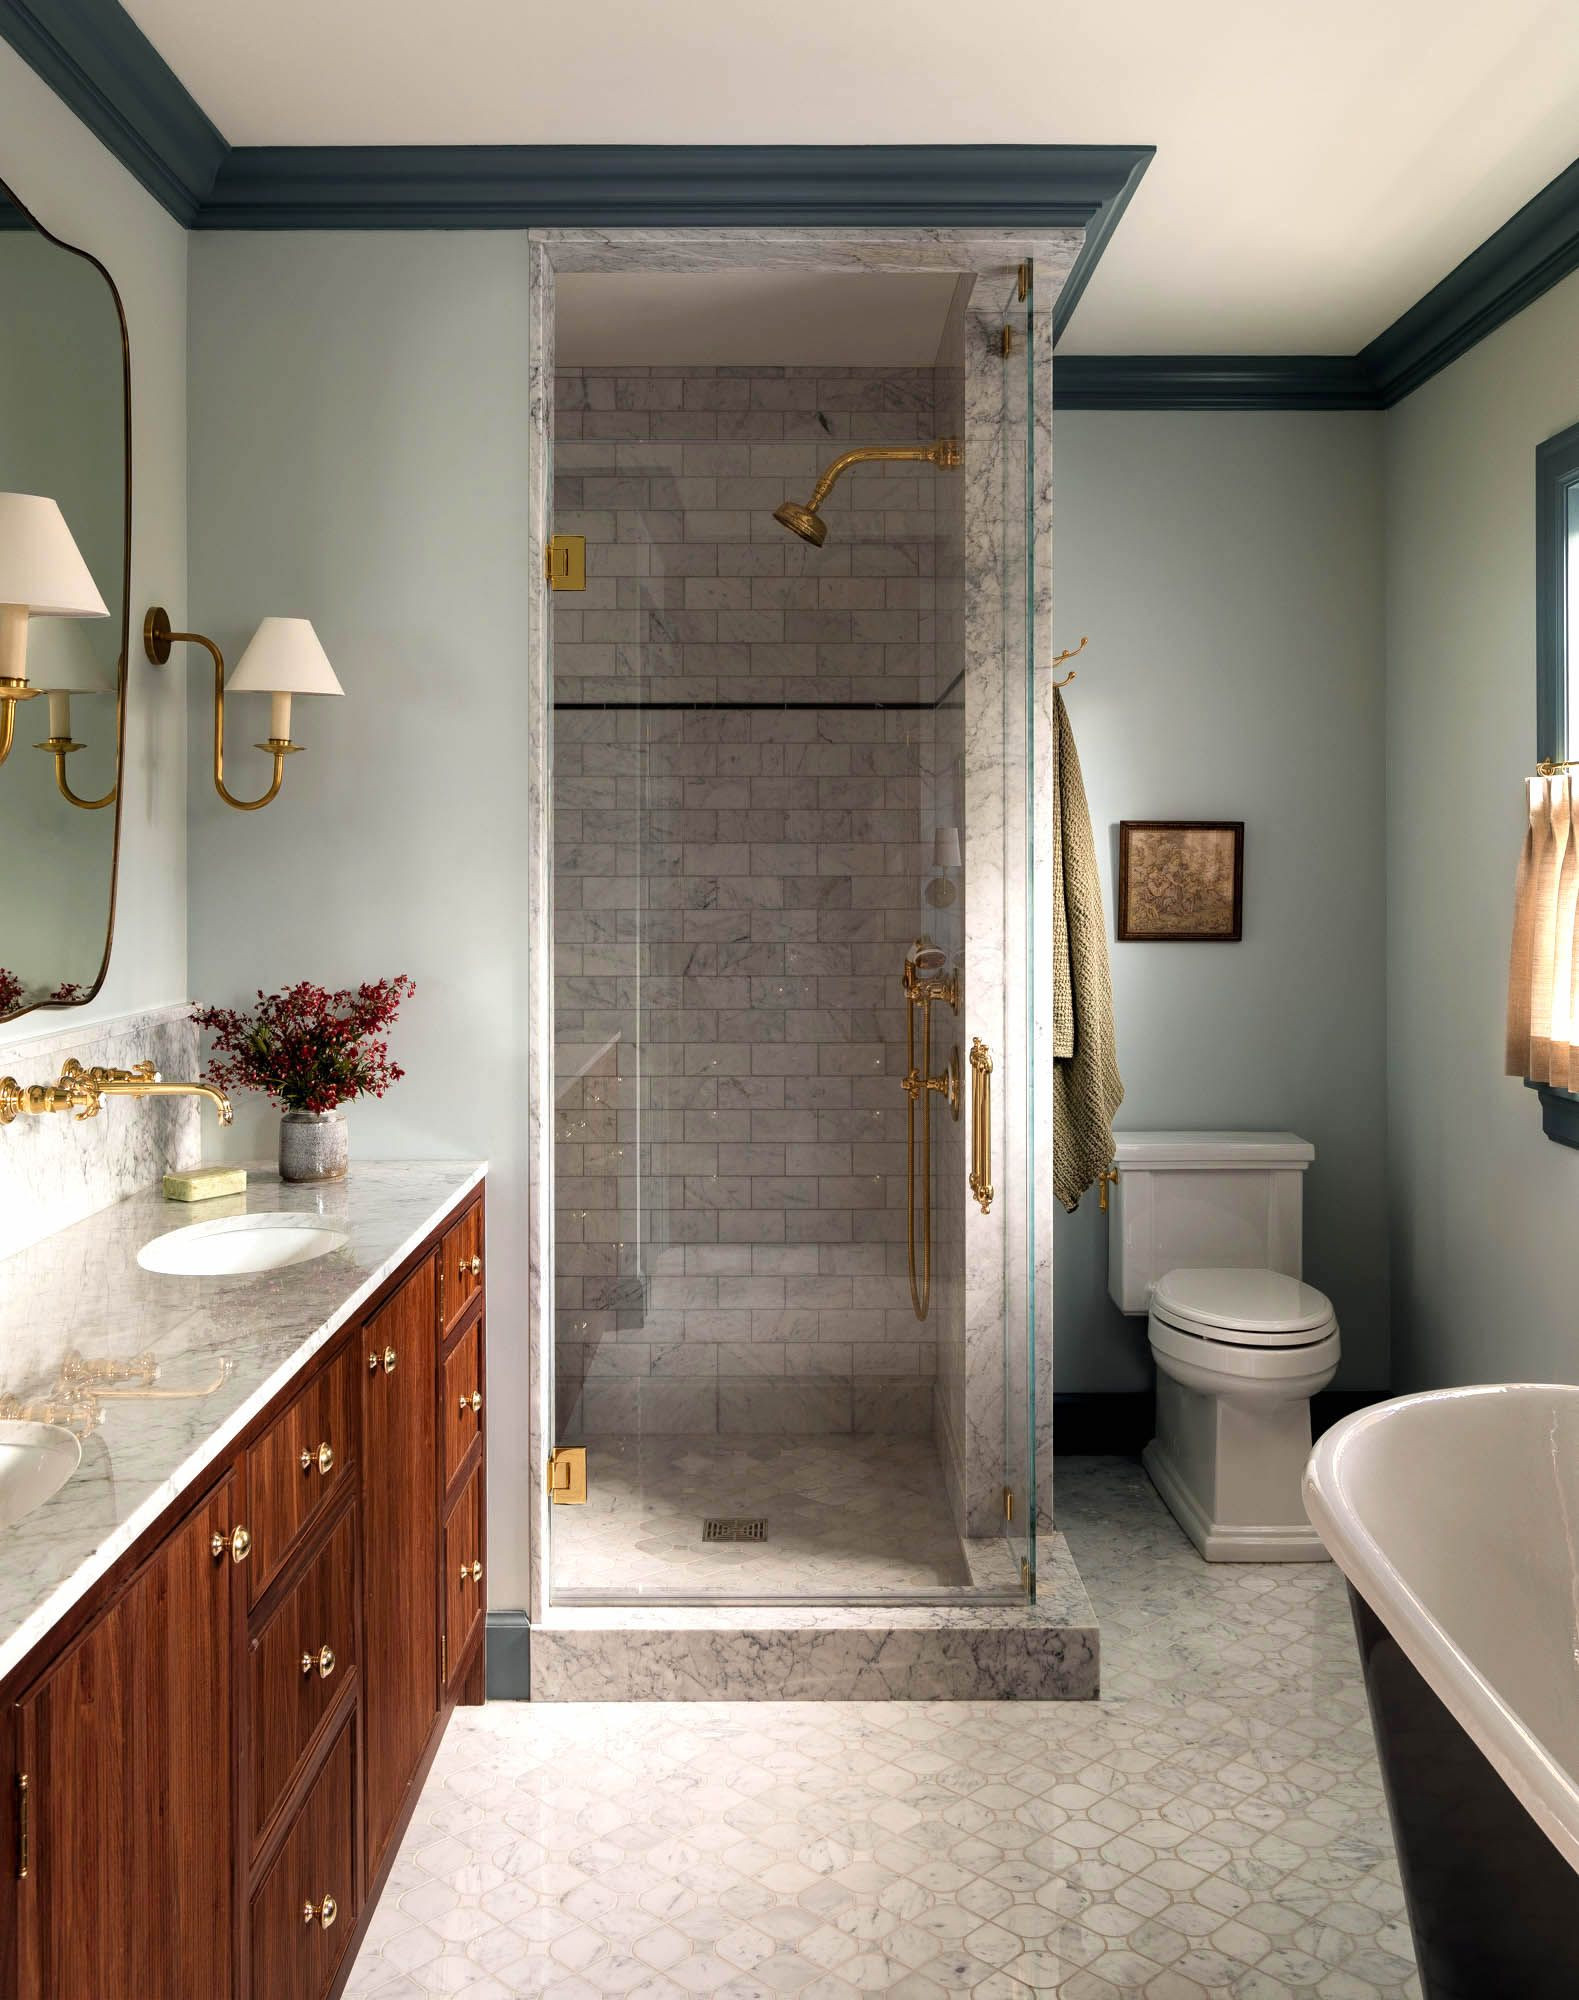 Great Guest Bathroom Ideas and Designer Tips